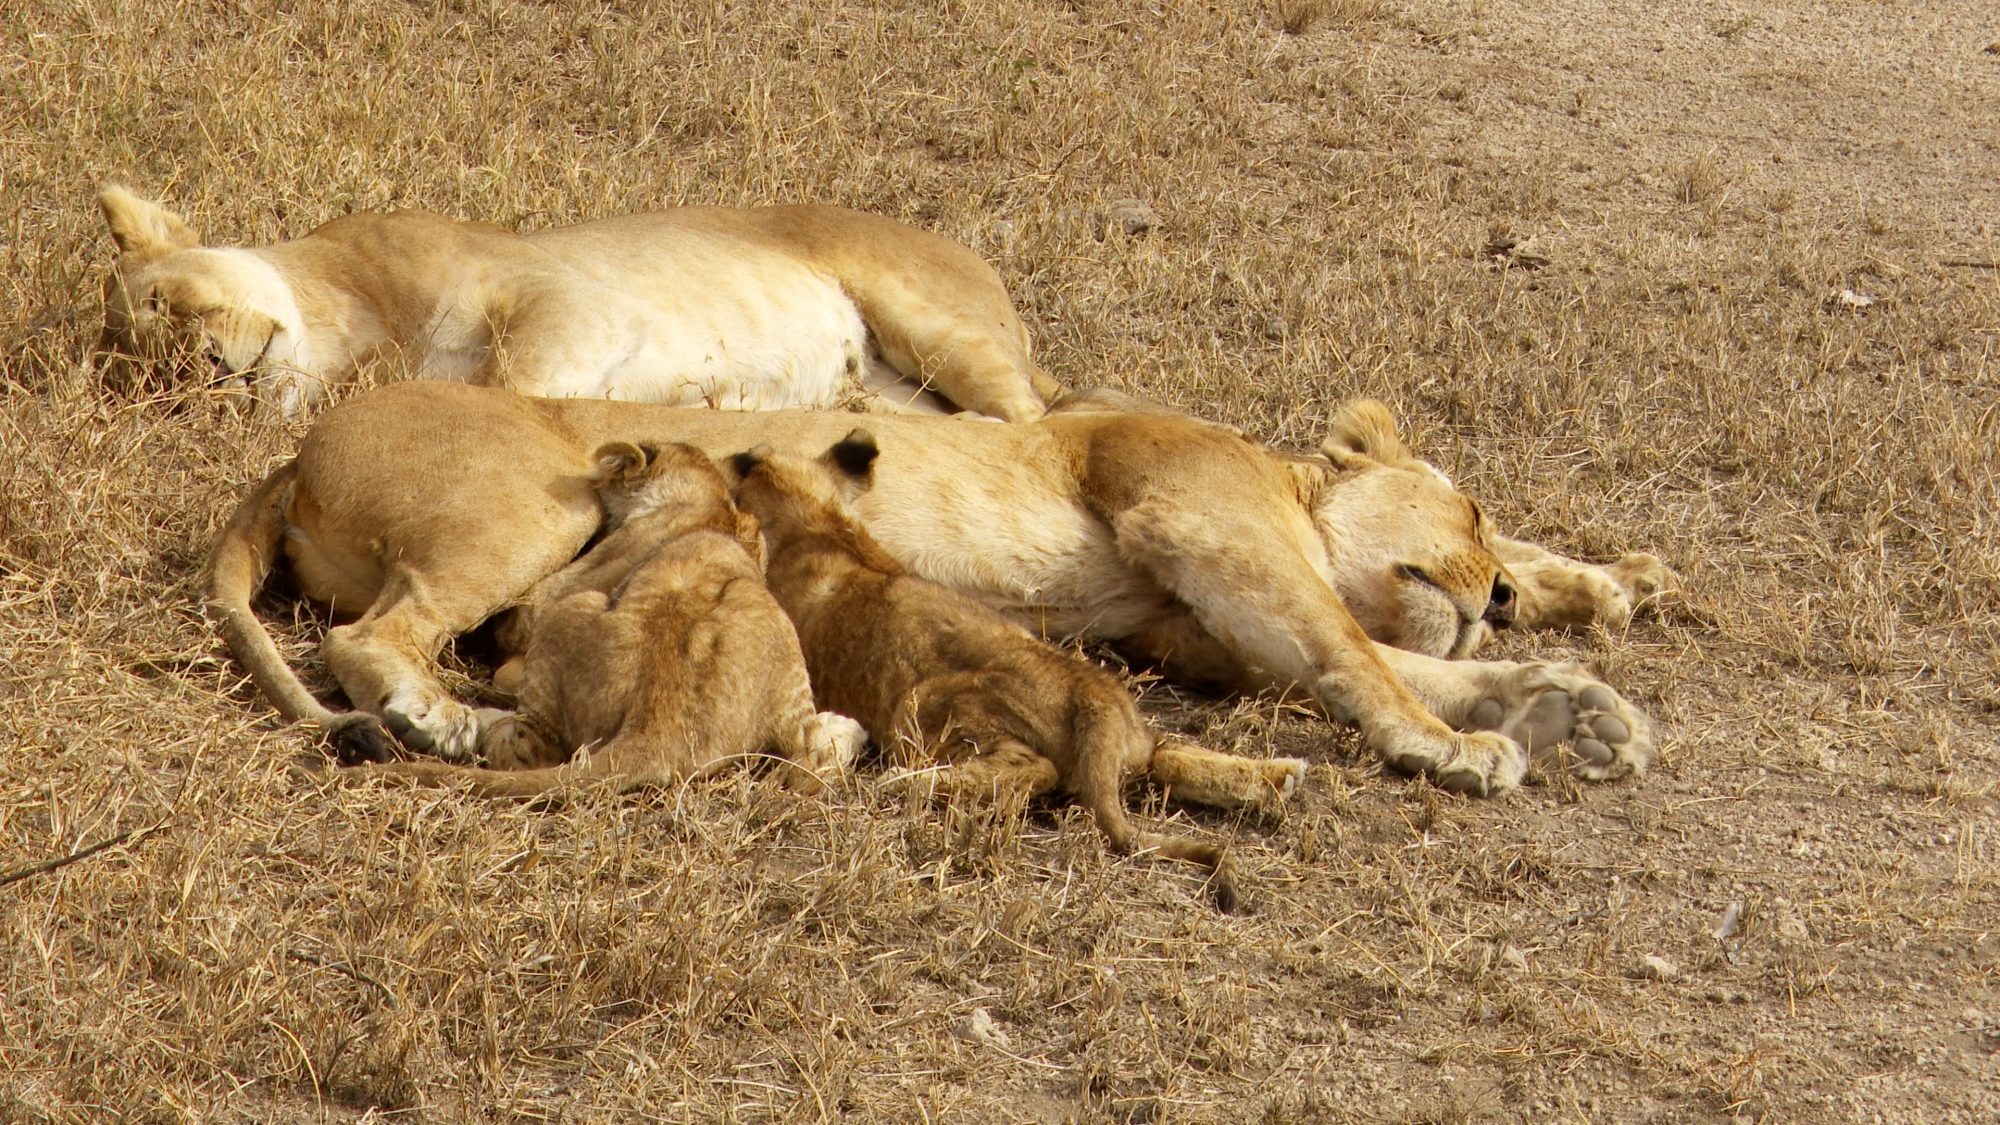 Lionesses and cubs – Tanzania, 2019